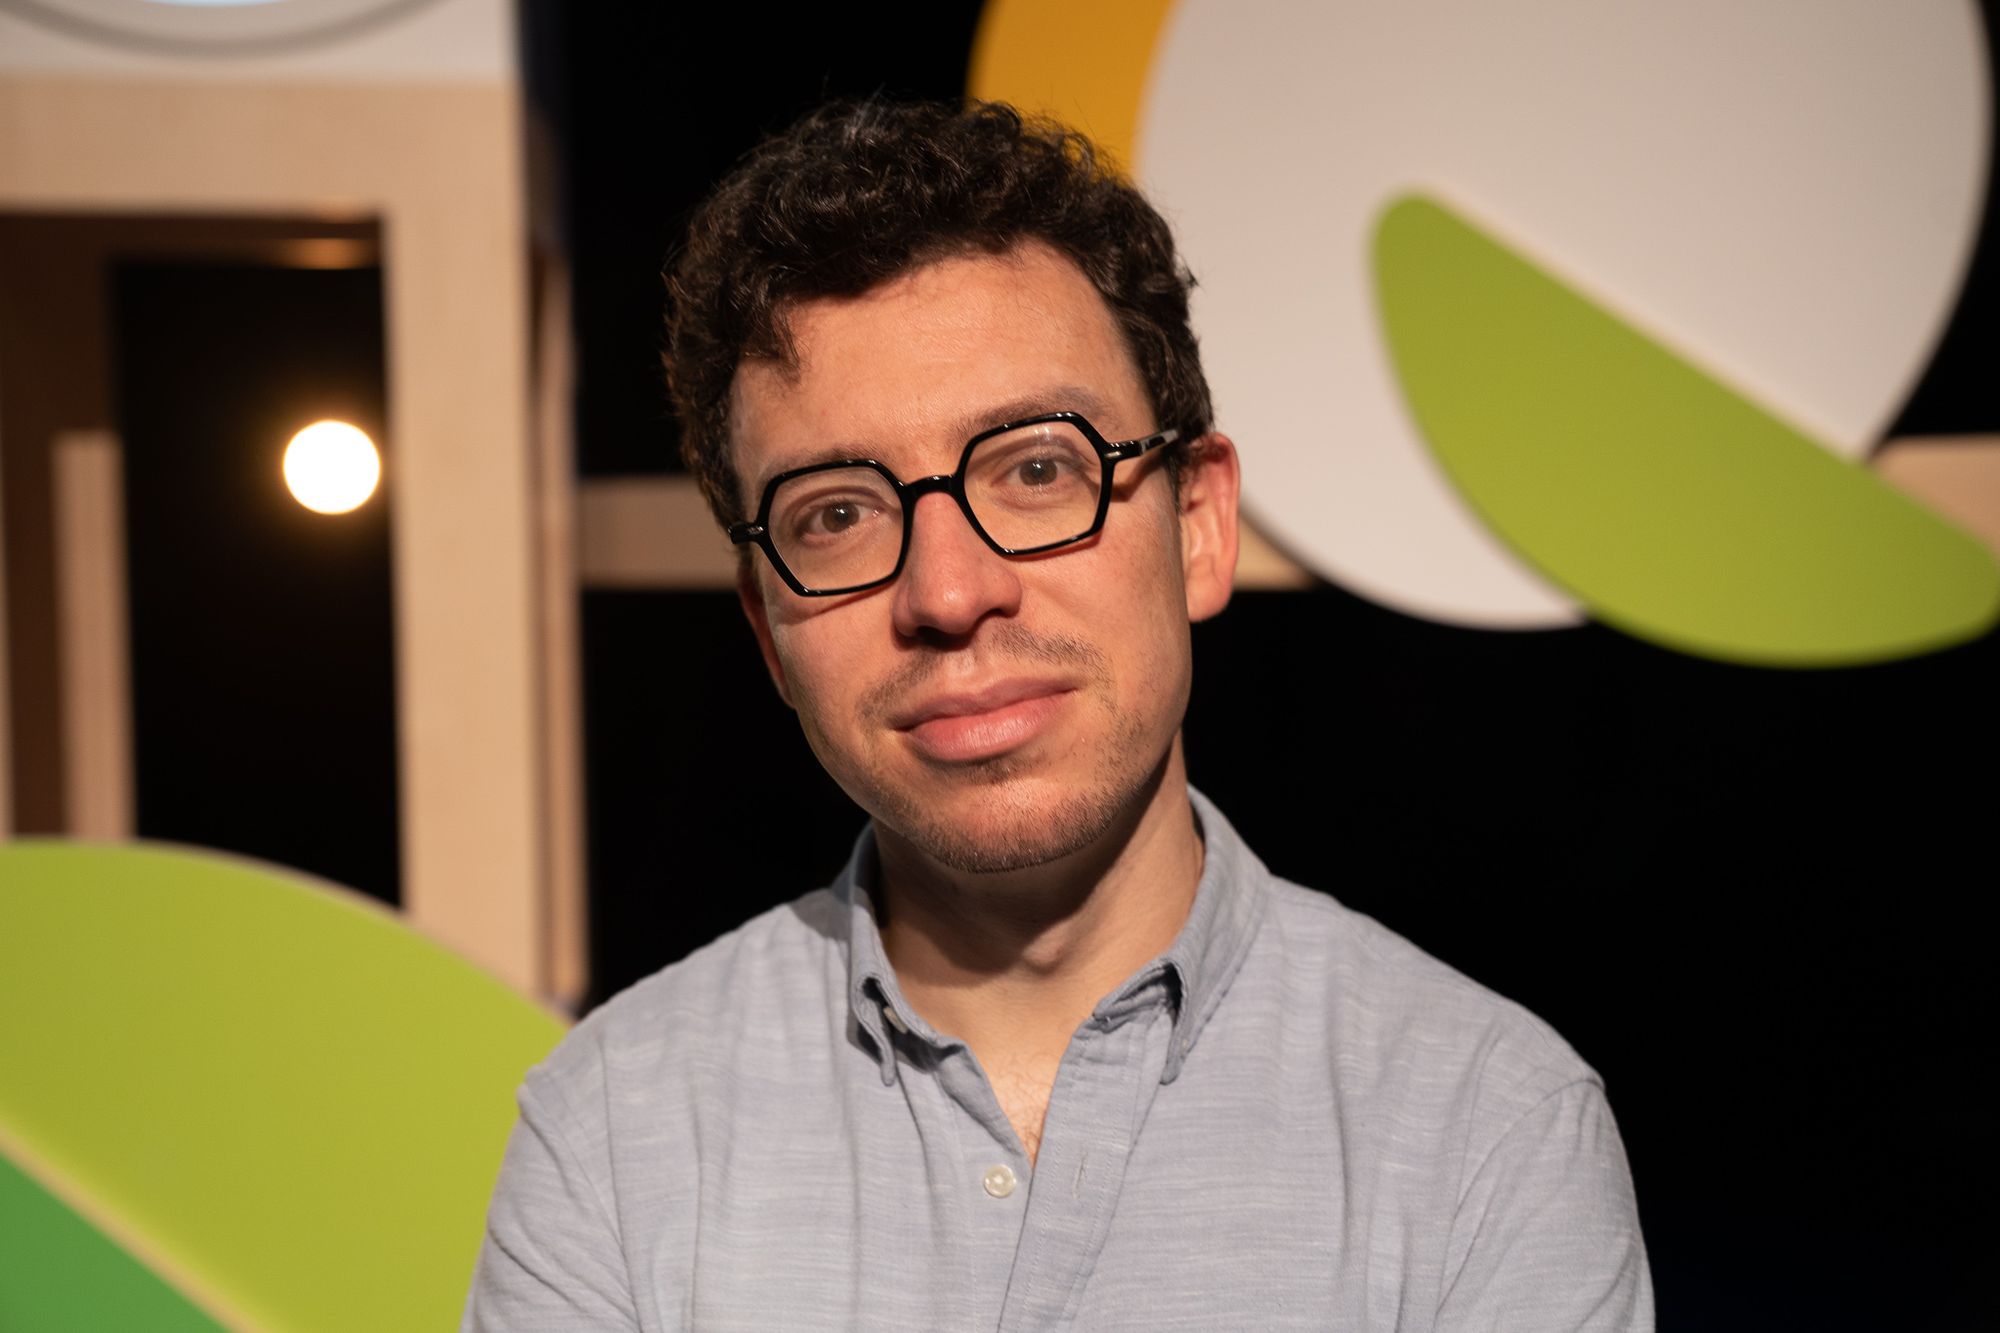 photograph of Luis von Ahn, CEO and co-founder of Duolingo